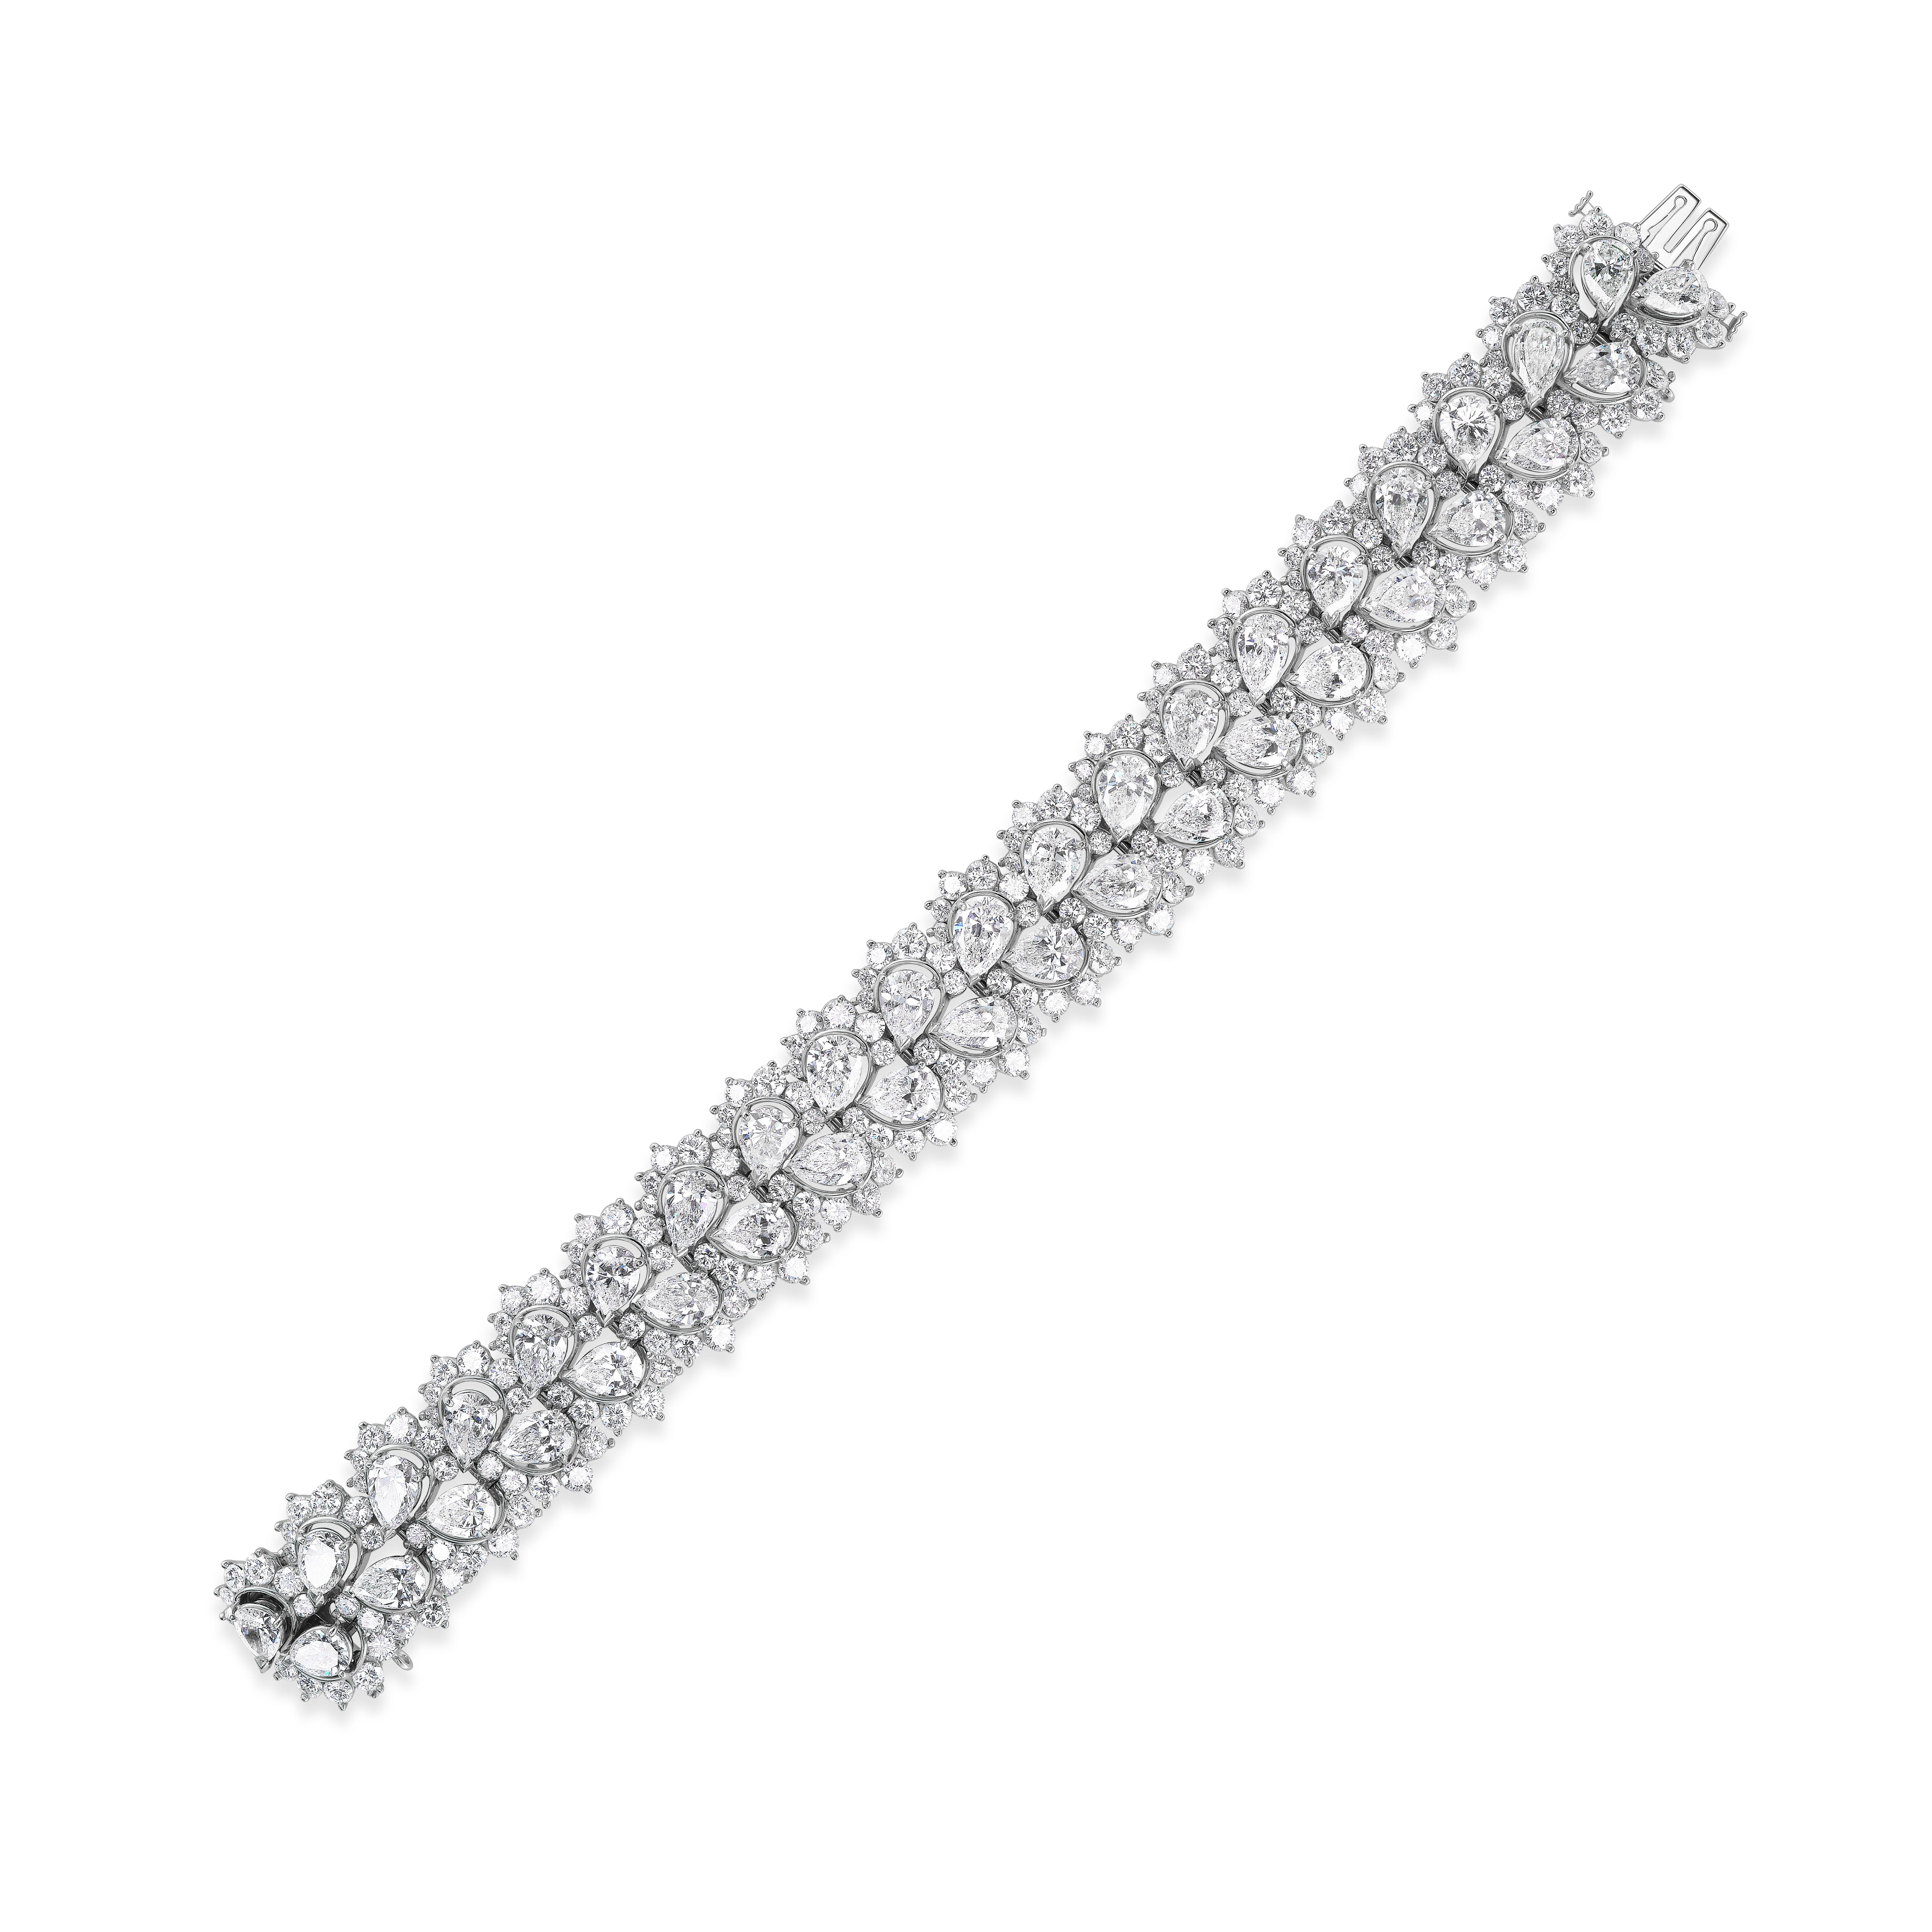 This dazzling diamond and platinum bracelet features 40 pear shape diamonds of approximately 24 carats in total, each off set and angled in two rows, and each adorned by 5 or 6 round brilliant diamond halos totalling 11 carats total leaving no inch